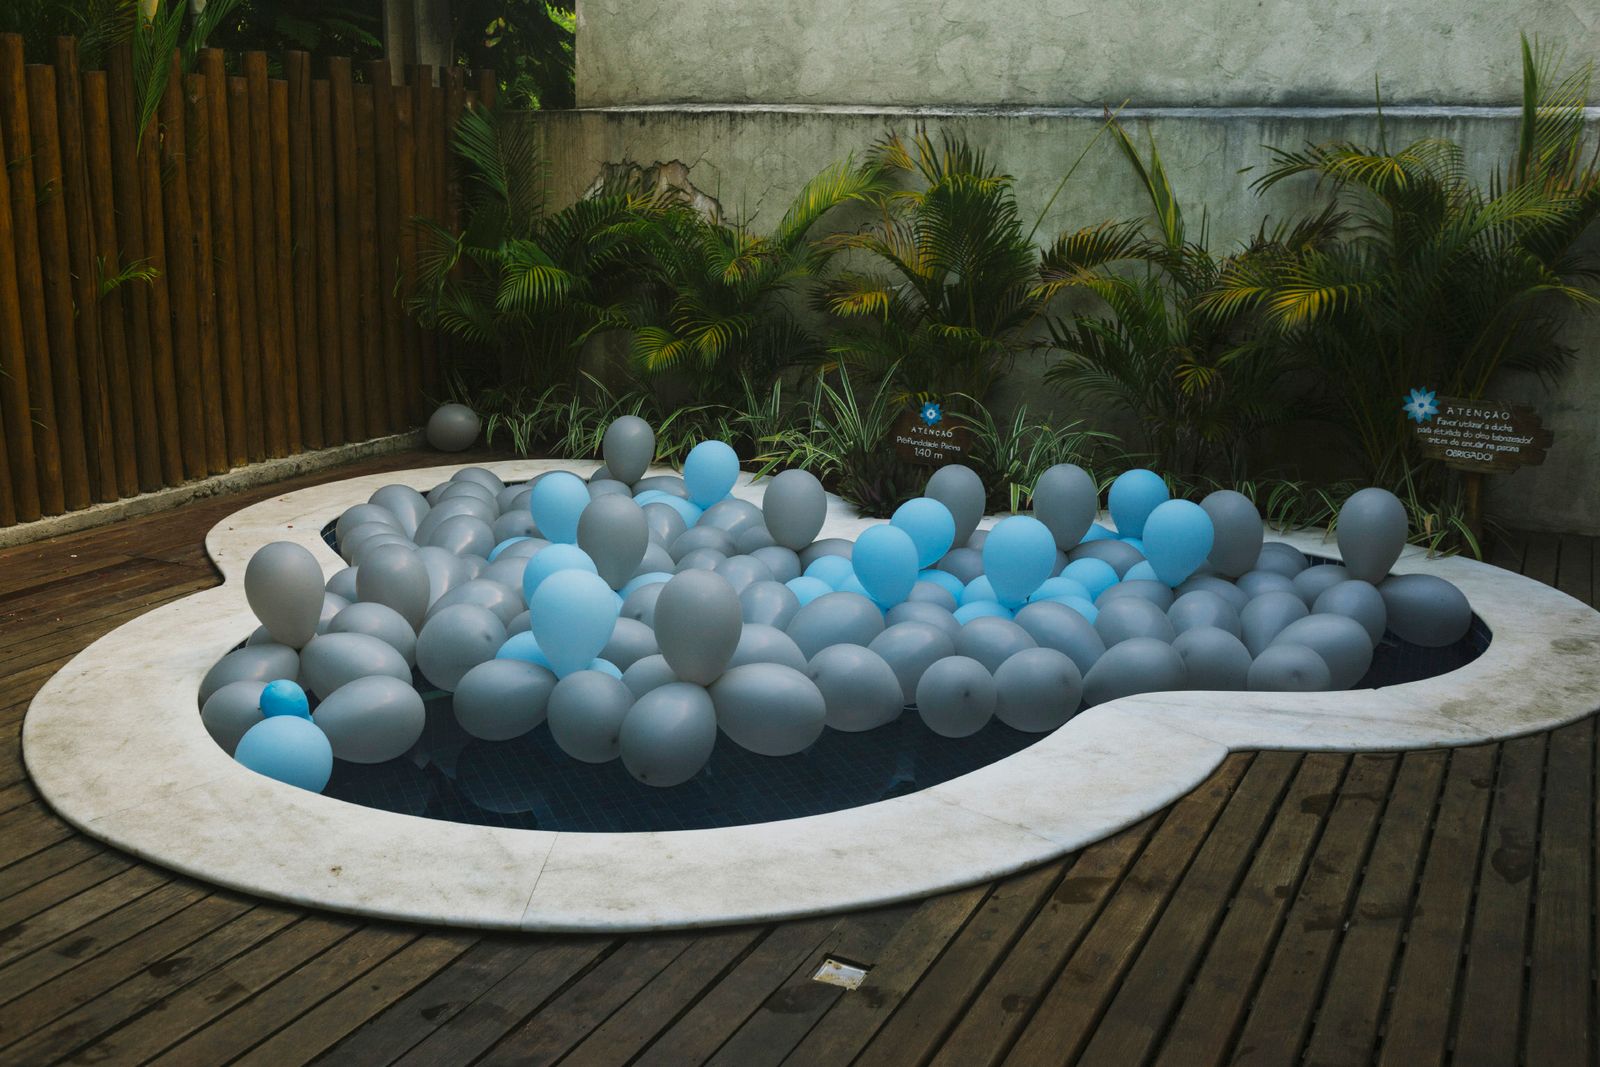 © Gabriel Carpes - A pool prepared for a New Years party at a hotel